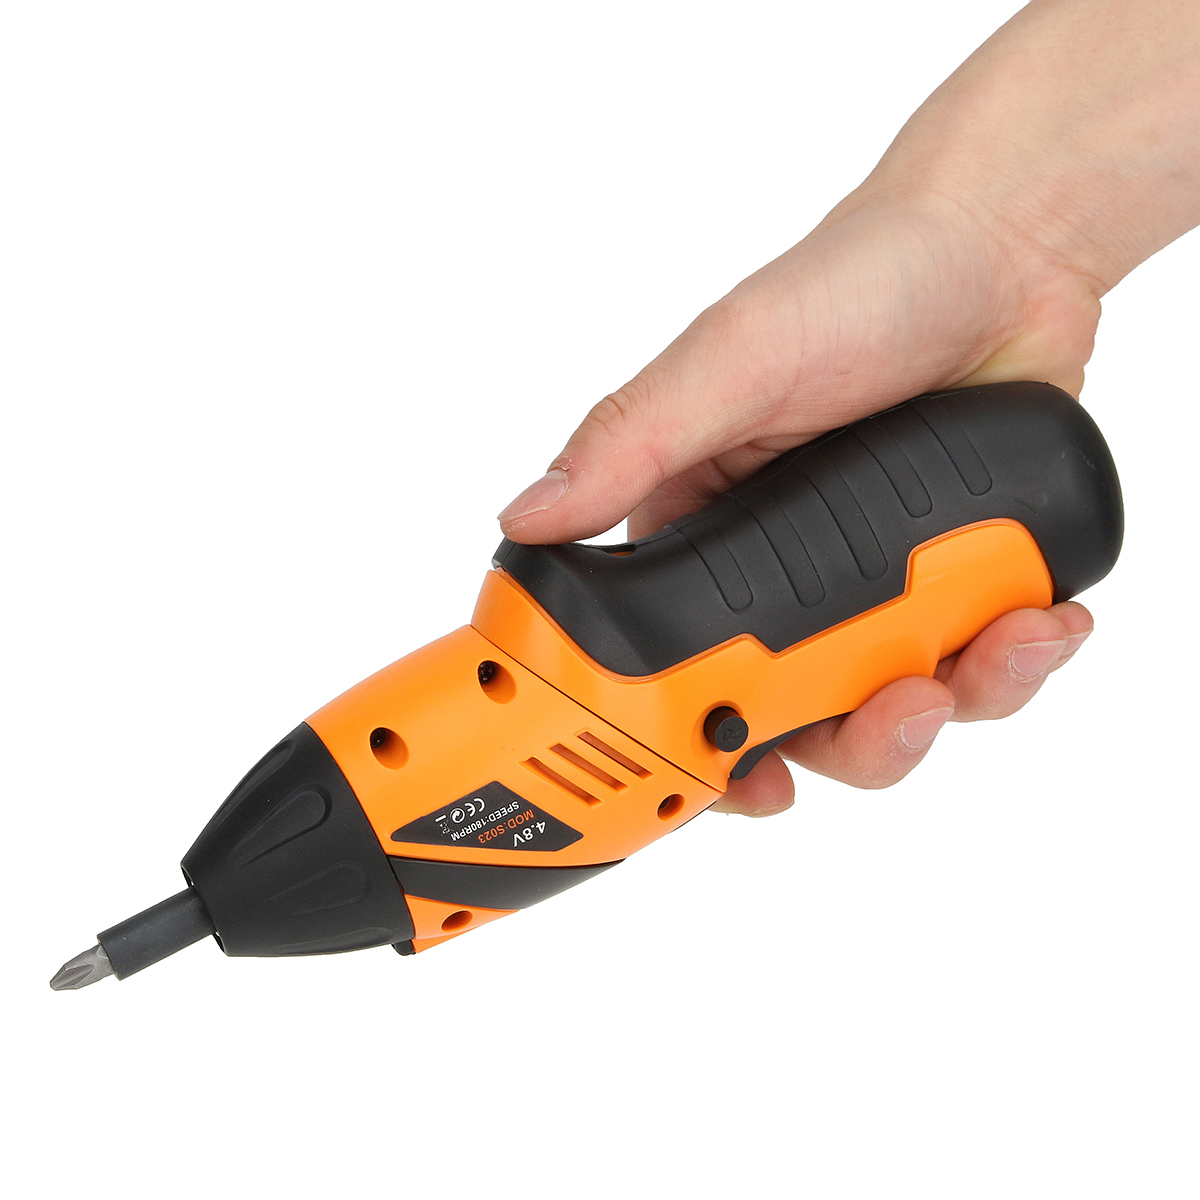 DCTOOLS-45-In-1-Non-slip-Electric-Drill-Cordless-Screwdriver-Foldable-with-US-Charger-1145930-6